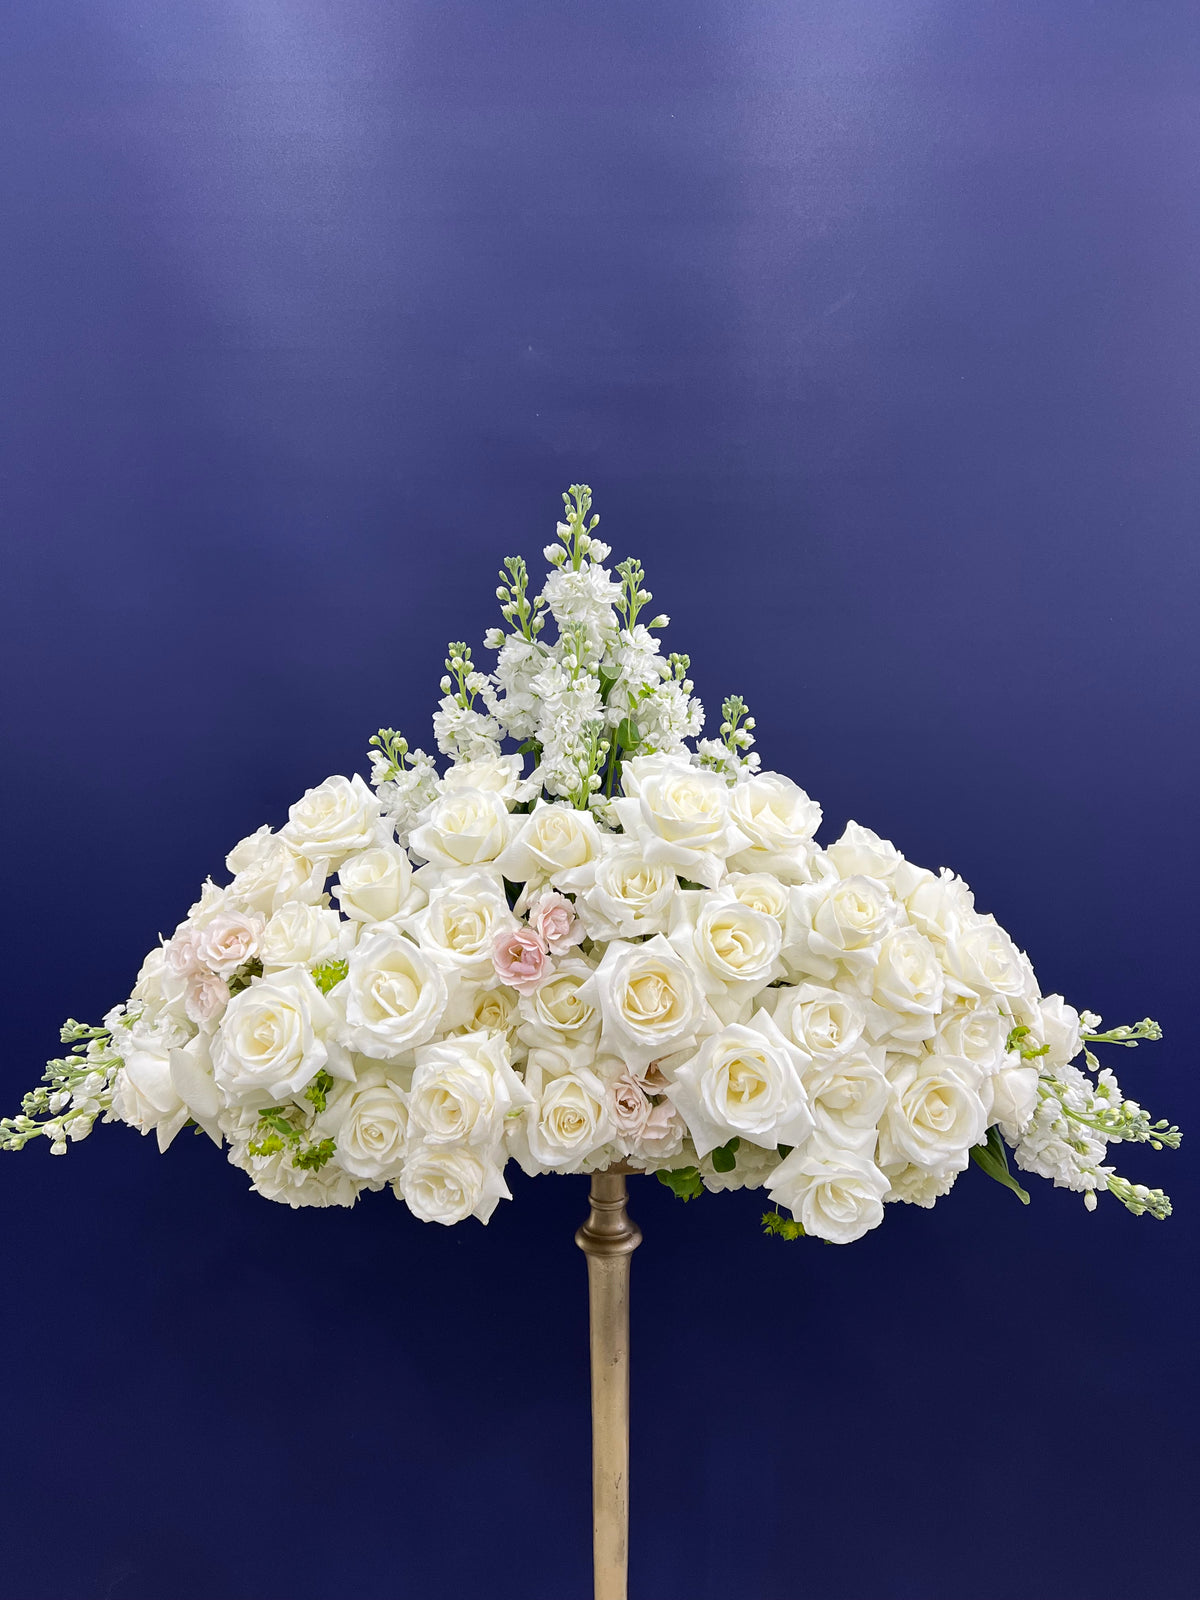 "Heavenly Embrace White Sympathy Arrangement by Yonge Florist - A serene blend of lilies, roses, spray roses, and hydrangeas, offering comfort and solace during difficult times. Reliable GTA flower delivery for funeral homes, chapels, churches, and cemeteries. Seasonal substitutions may occur to maintain style and color. Photography pedestal not included."